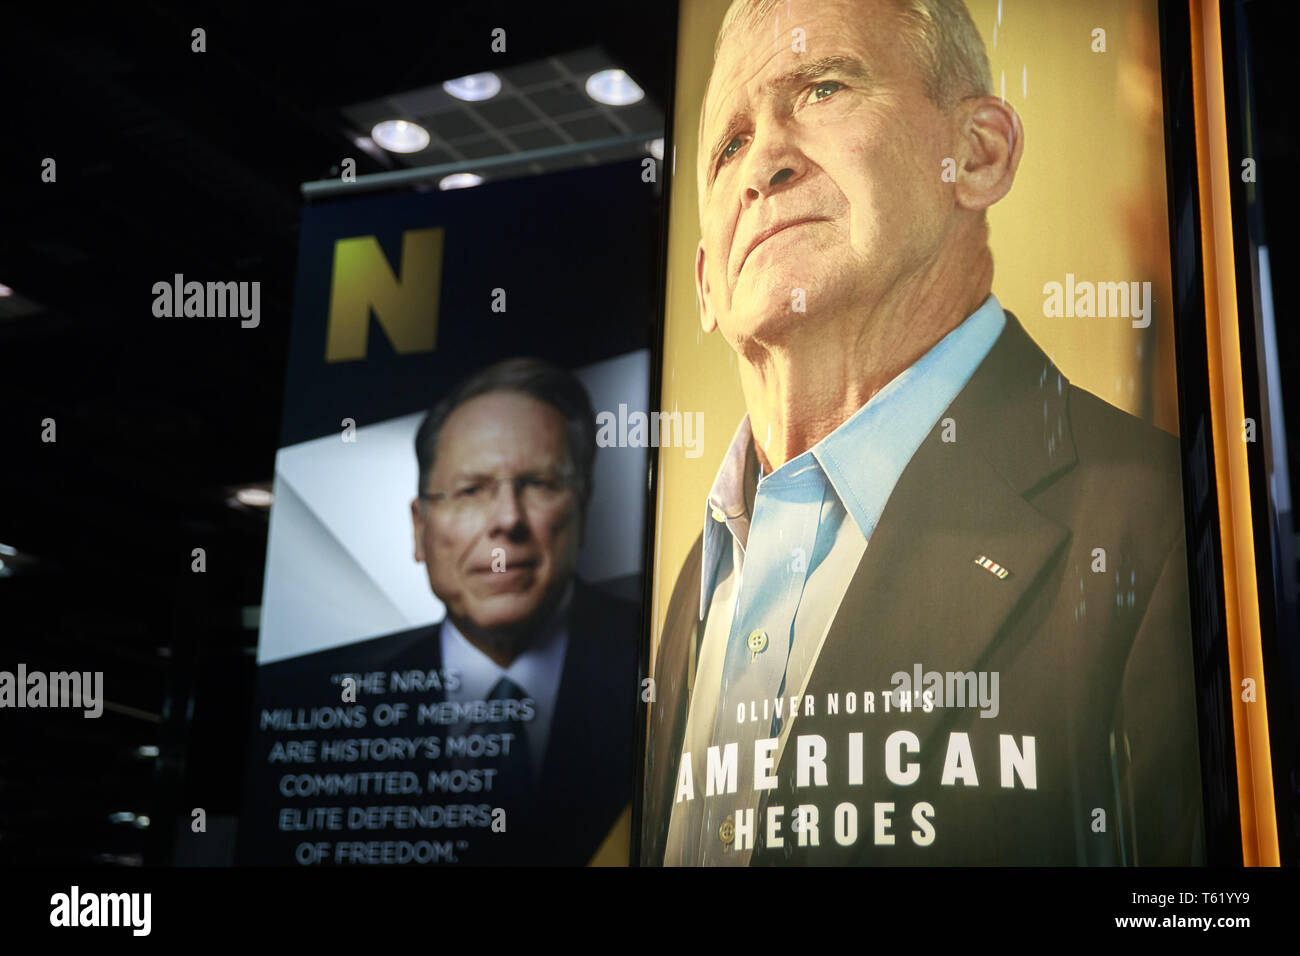 Indianapolis, Indiana, UK. 27th Apr, 2019. Photos of NRA Chief Executive and Executive Vice President Wayne LaPierre (L) and former president of the NRA Oliver North (R) are on display during the third day of the National Rifle Association convention being held nearby. Credit: Jeremy Hogan/SOPA Images/ZUMA Wire/Alamy Live News Stock Photo